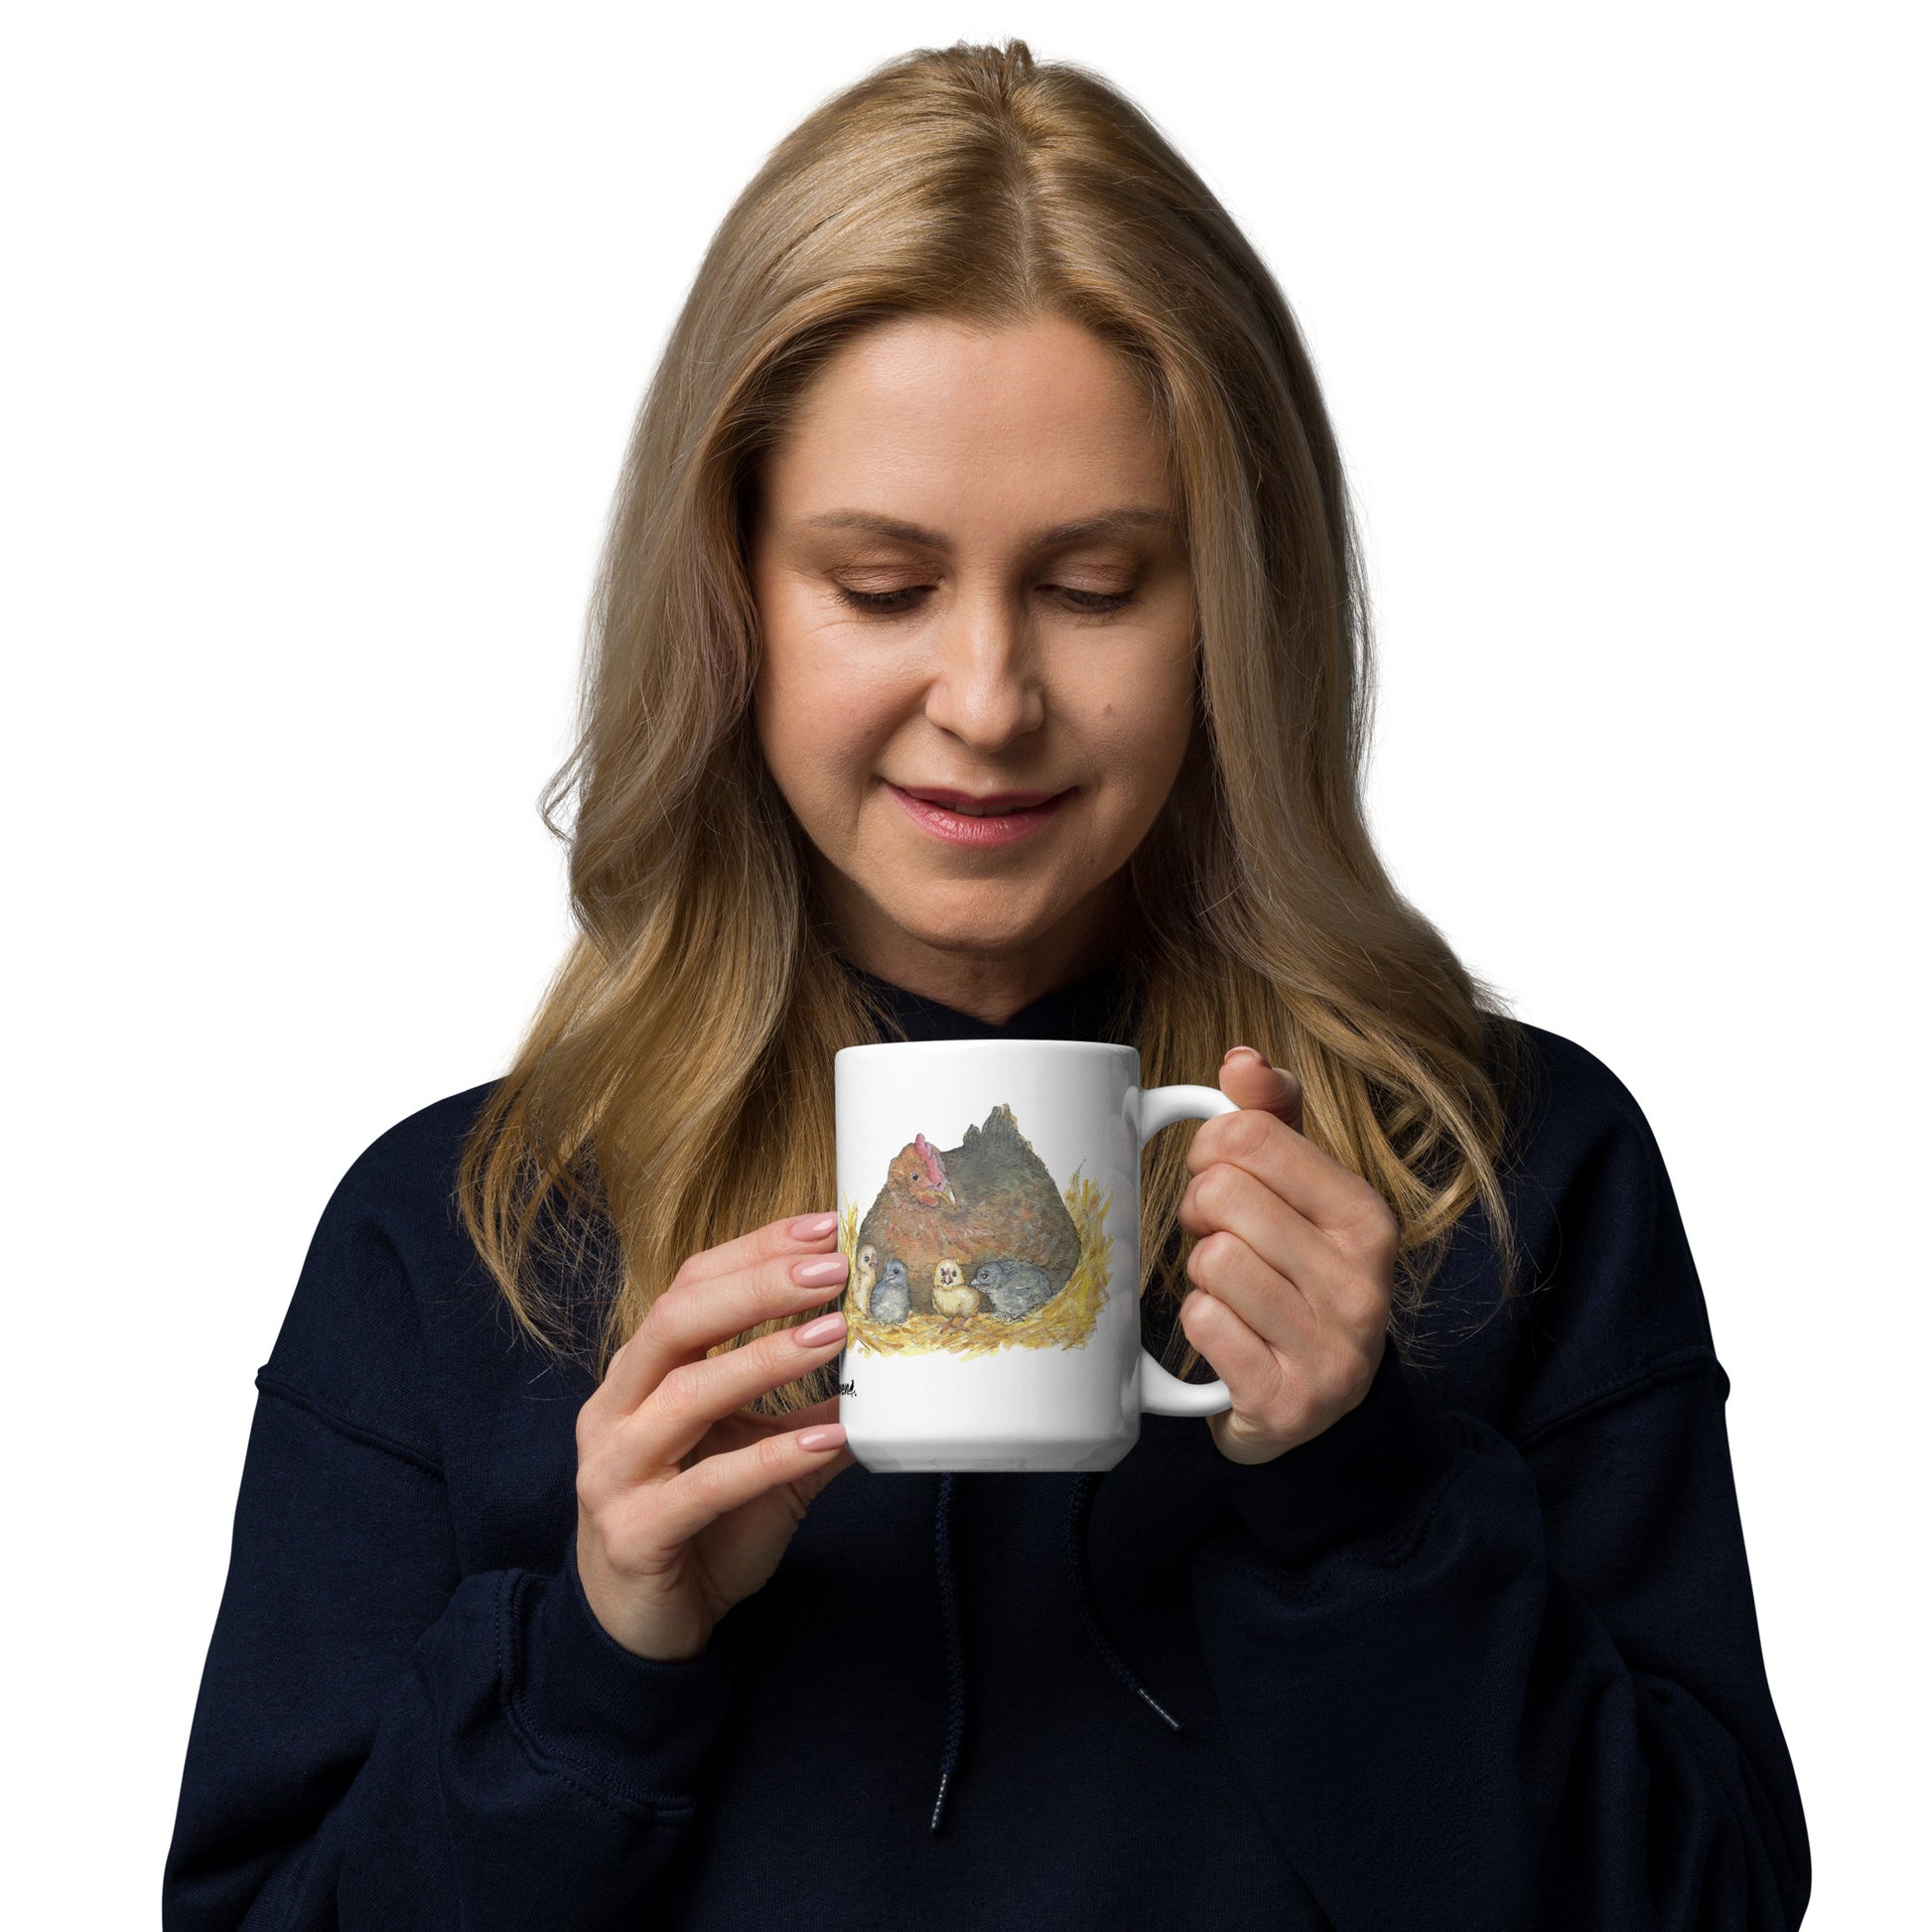 15 ounce white ceramic mug. Features double-sided print of a watercolor mother hen and chicks. Dishwasher and microwave safe. Shown in female model's hands.